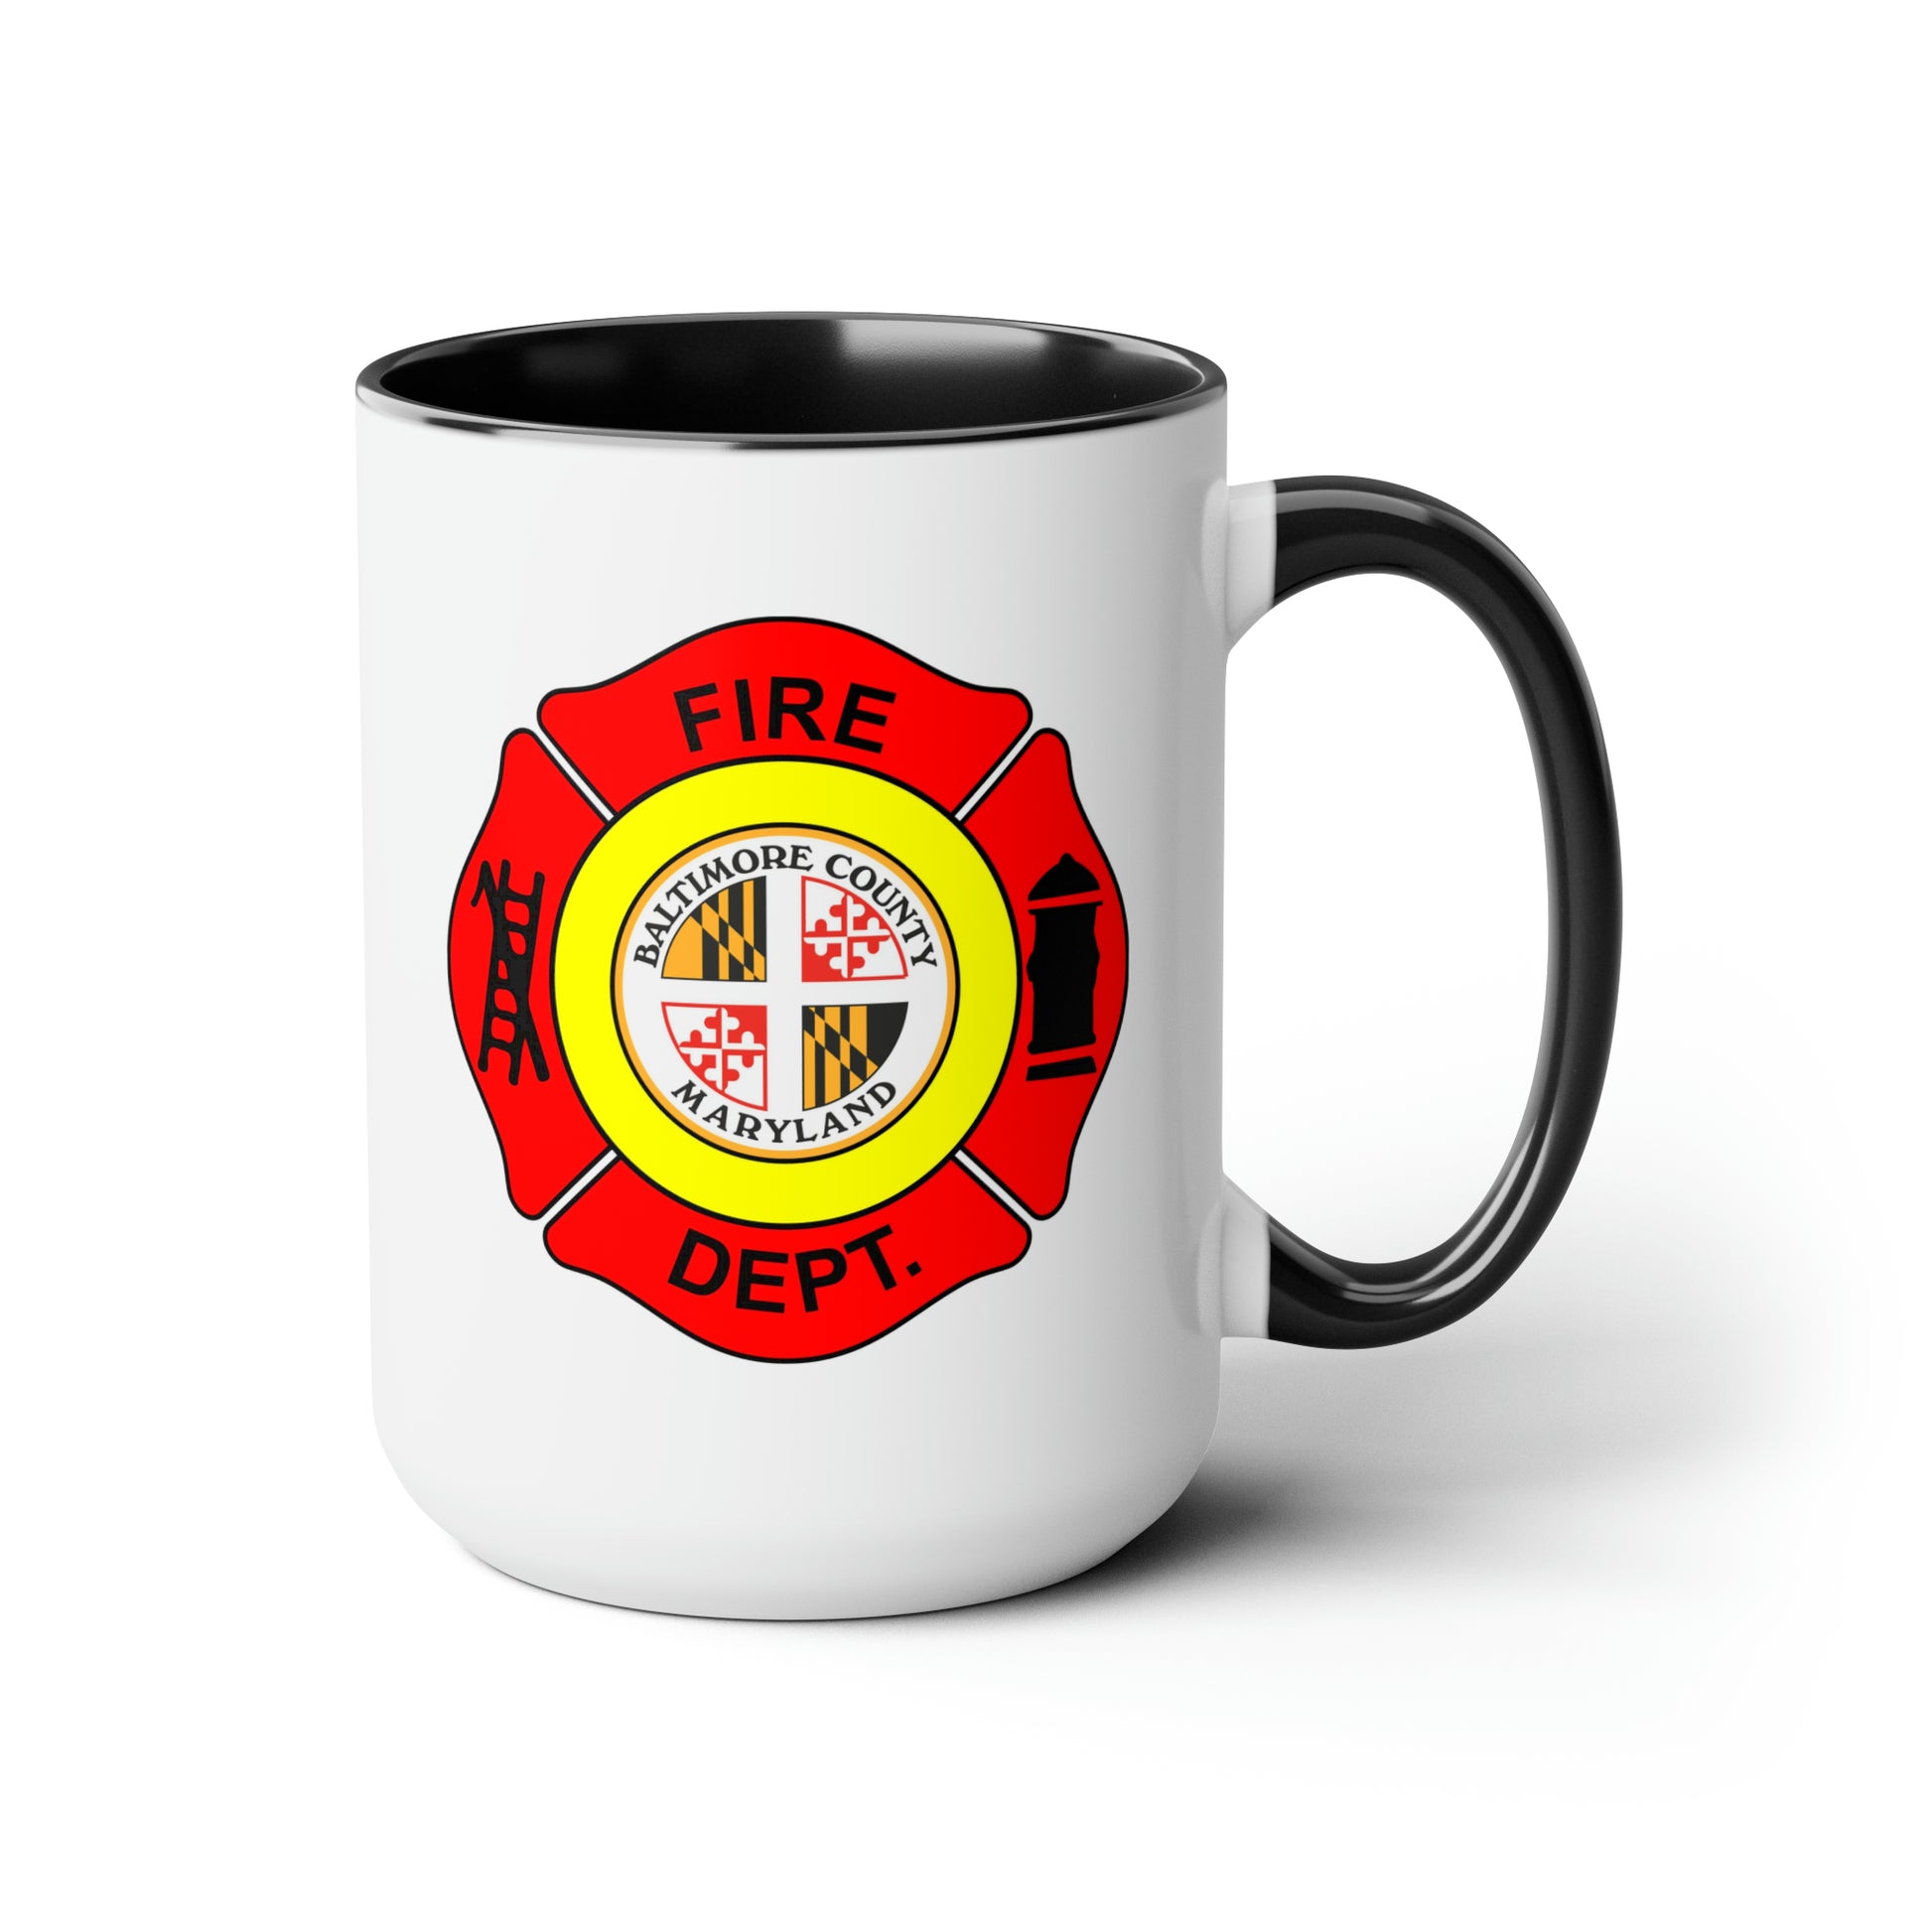 Baltimore Fire Department Coffee Mug - Double Sided Black Accent White Ceramic 15oz by TheGlassyLass